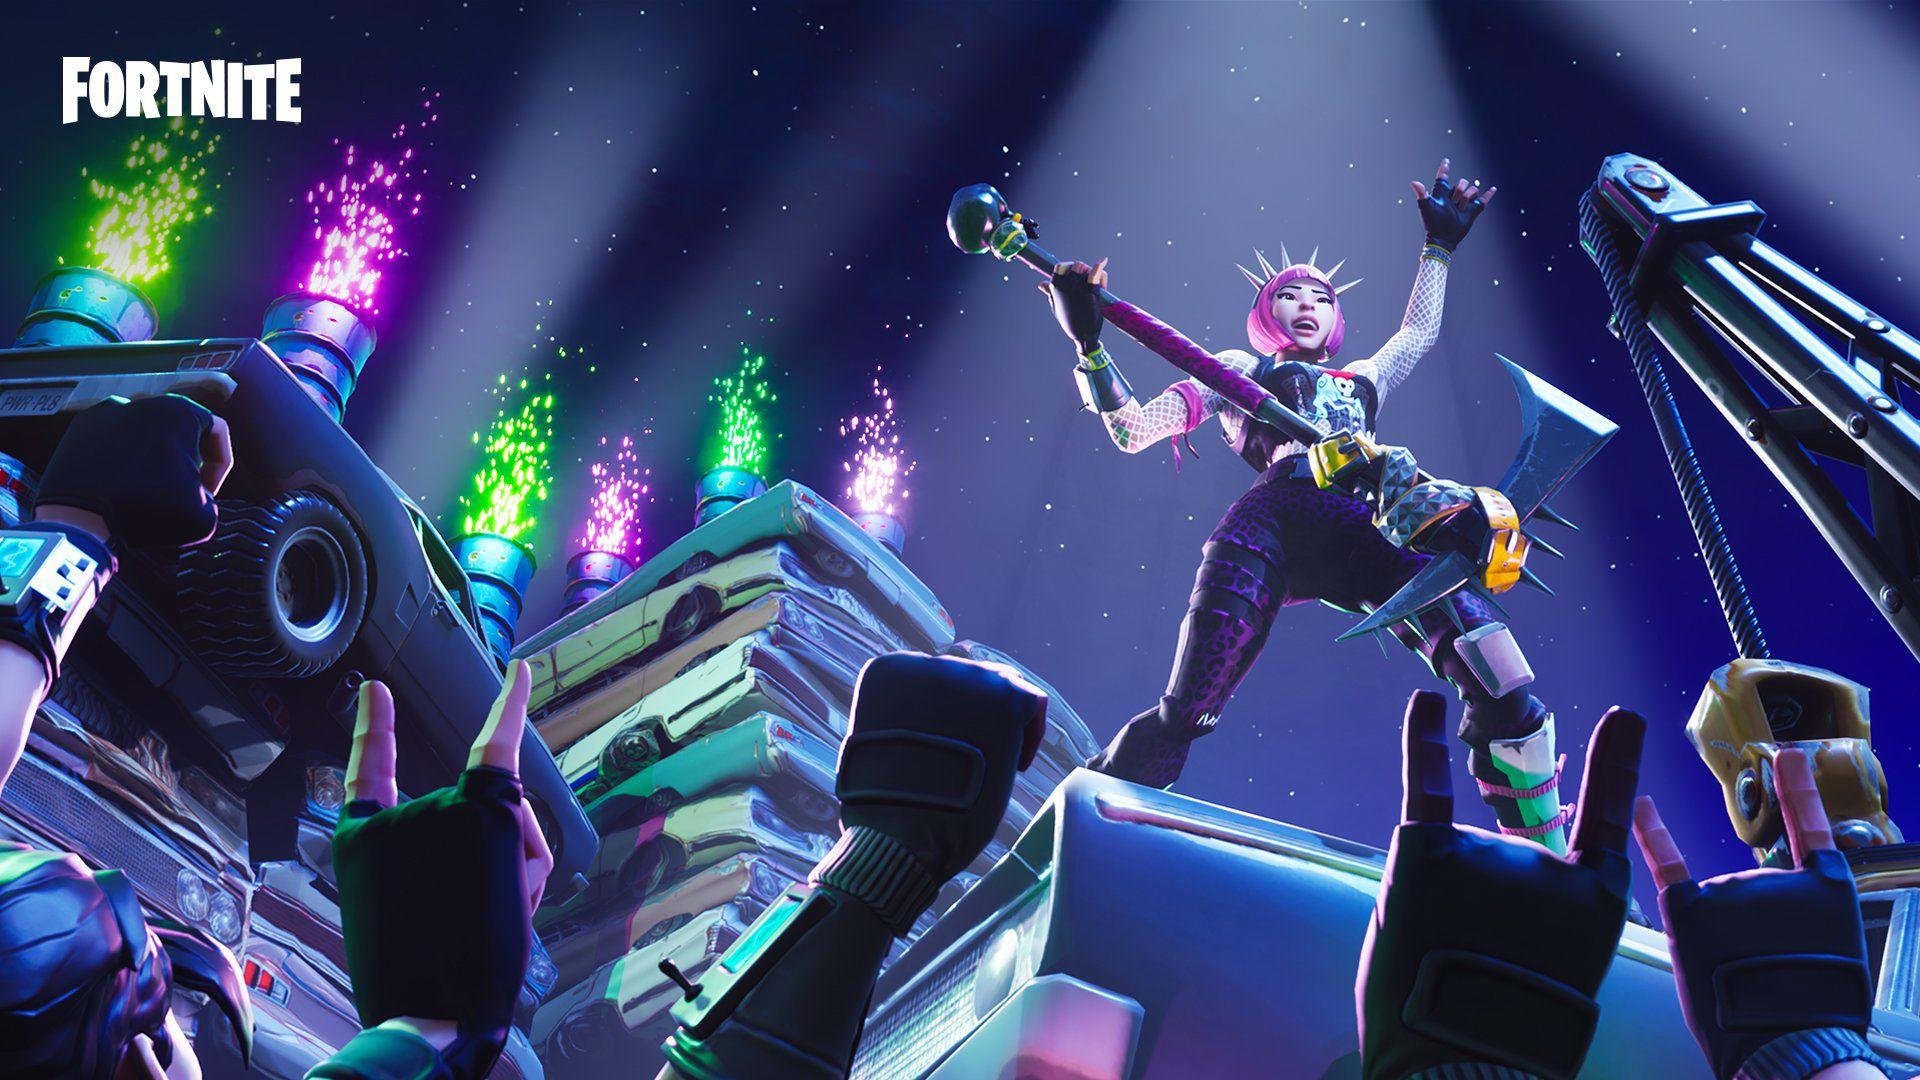 Fortnite Background Power Chord Wallpaper and Free Stock